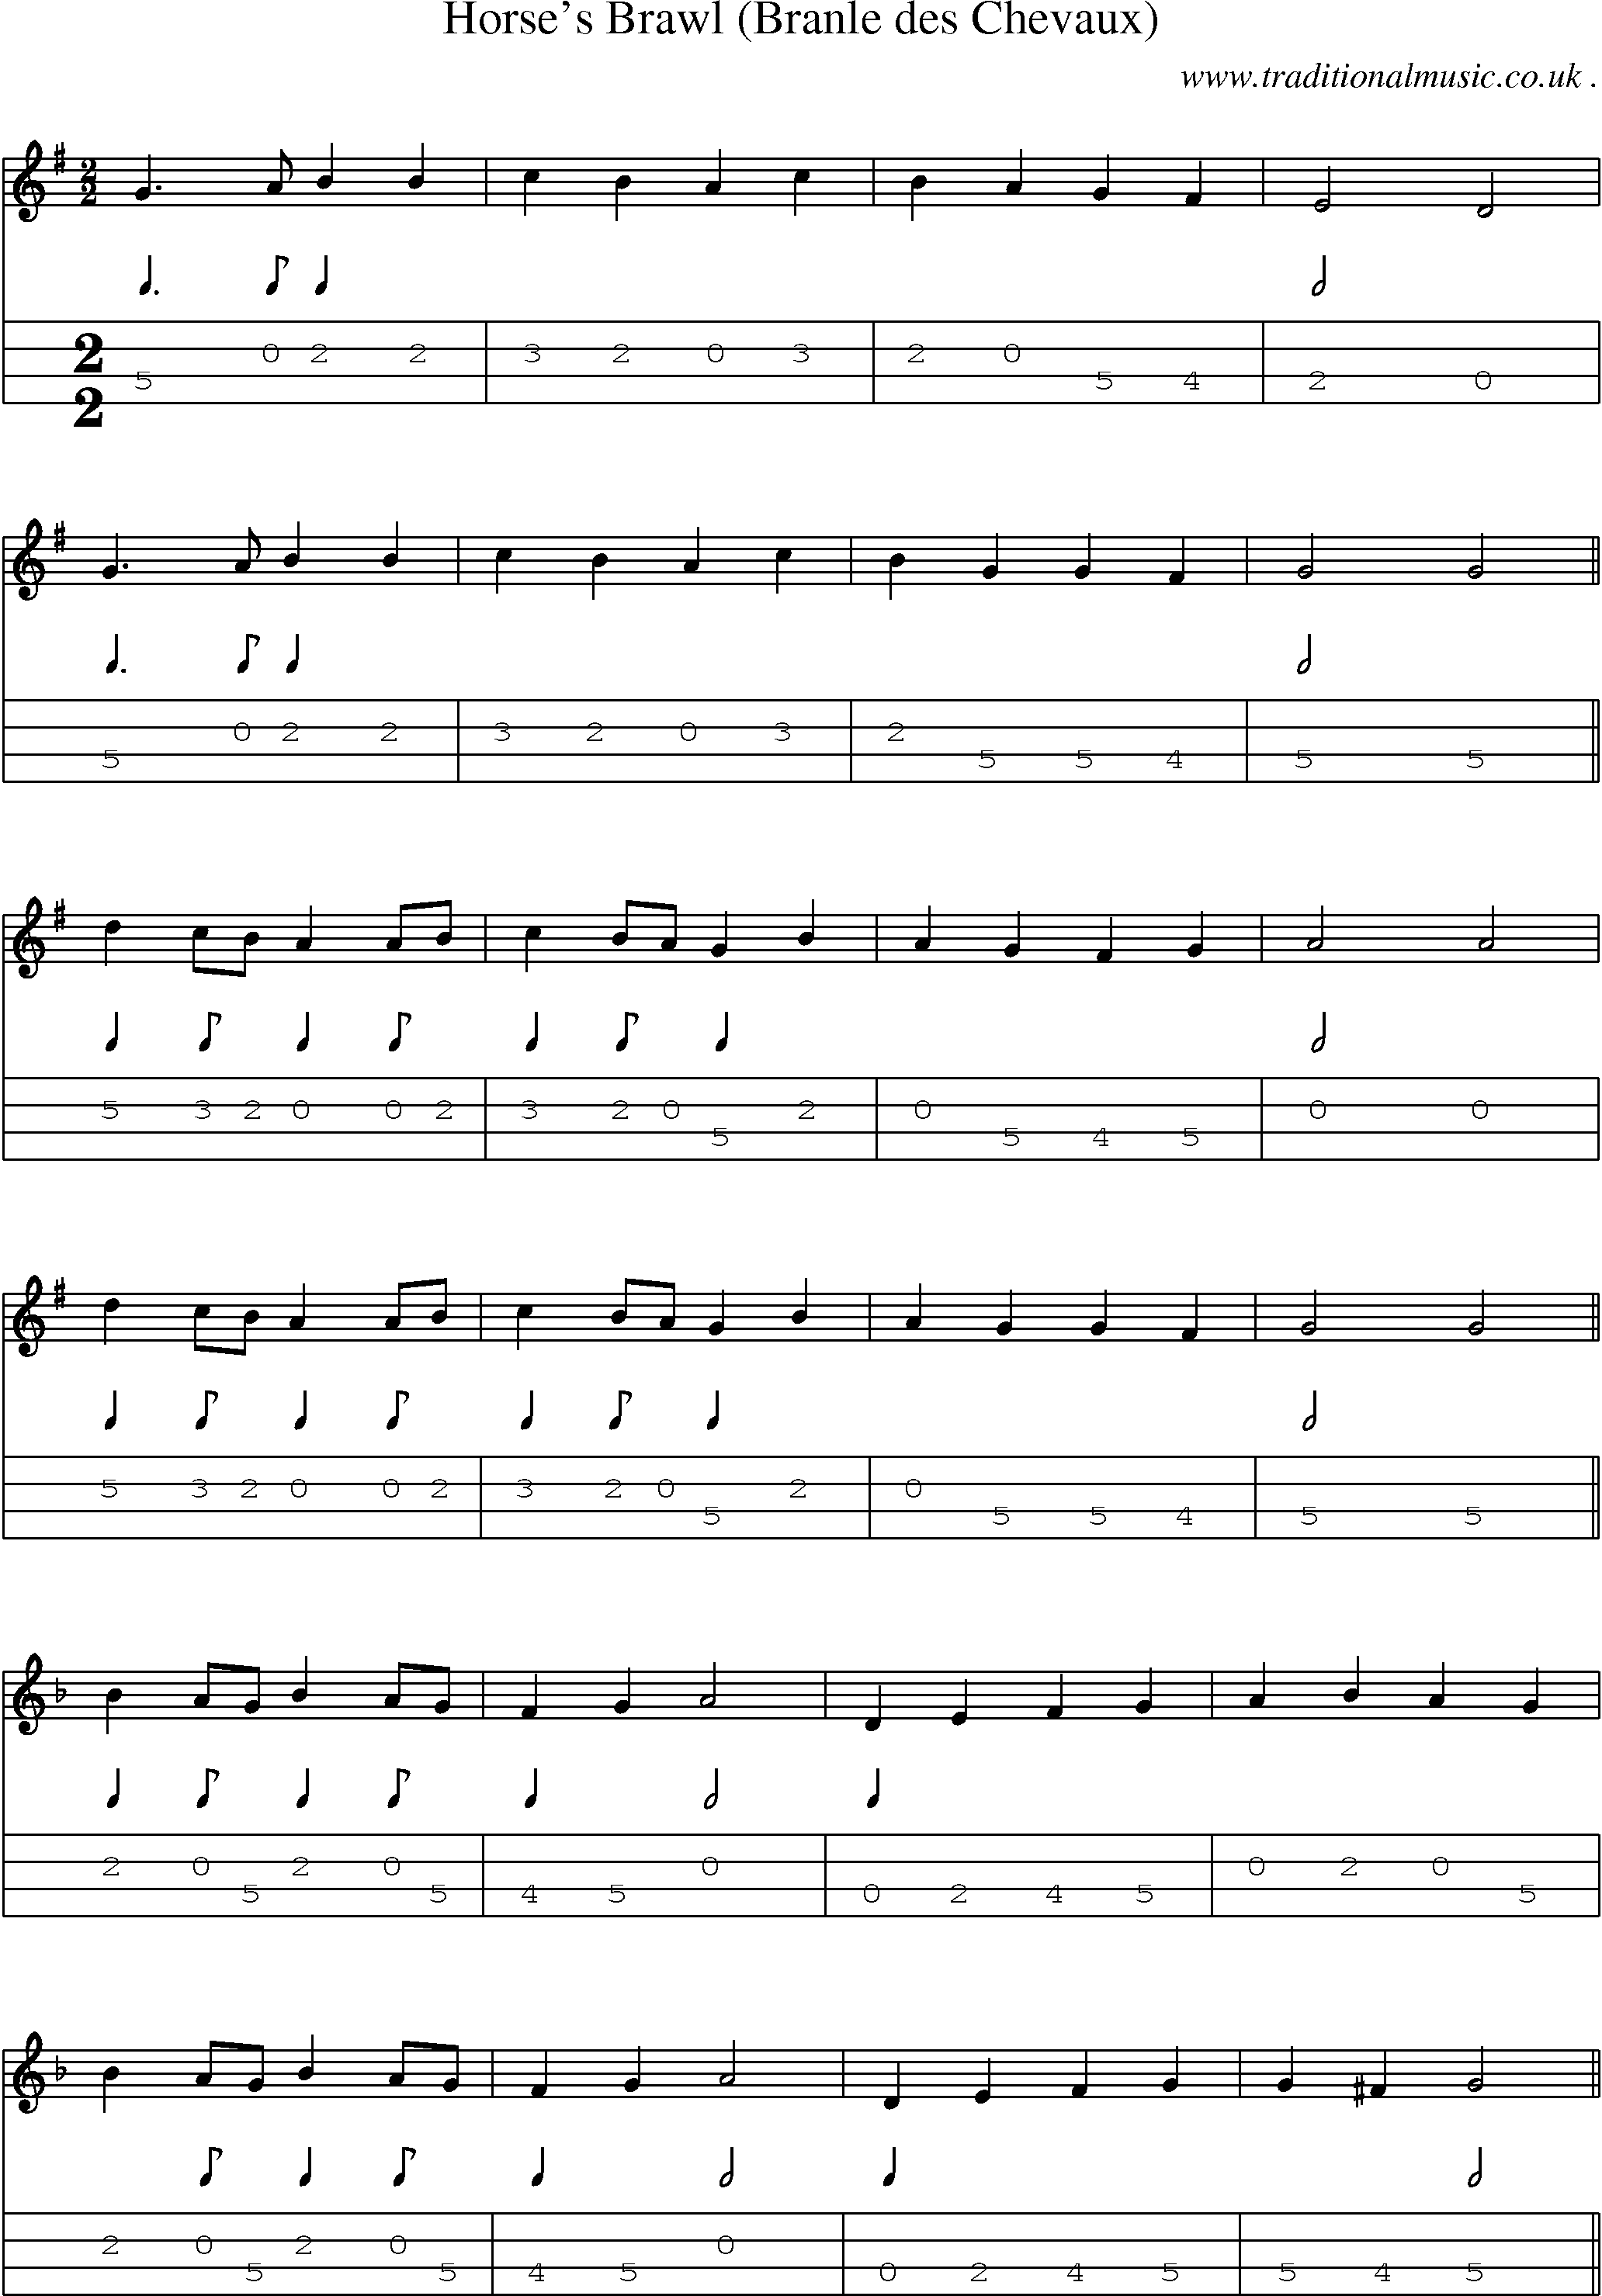 Sheet-Music and Mandolin Tabs for Horses Brawl (branle Des Chevaux)